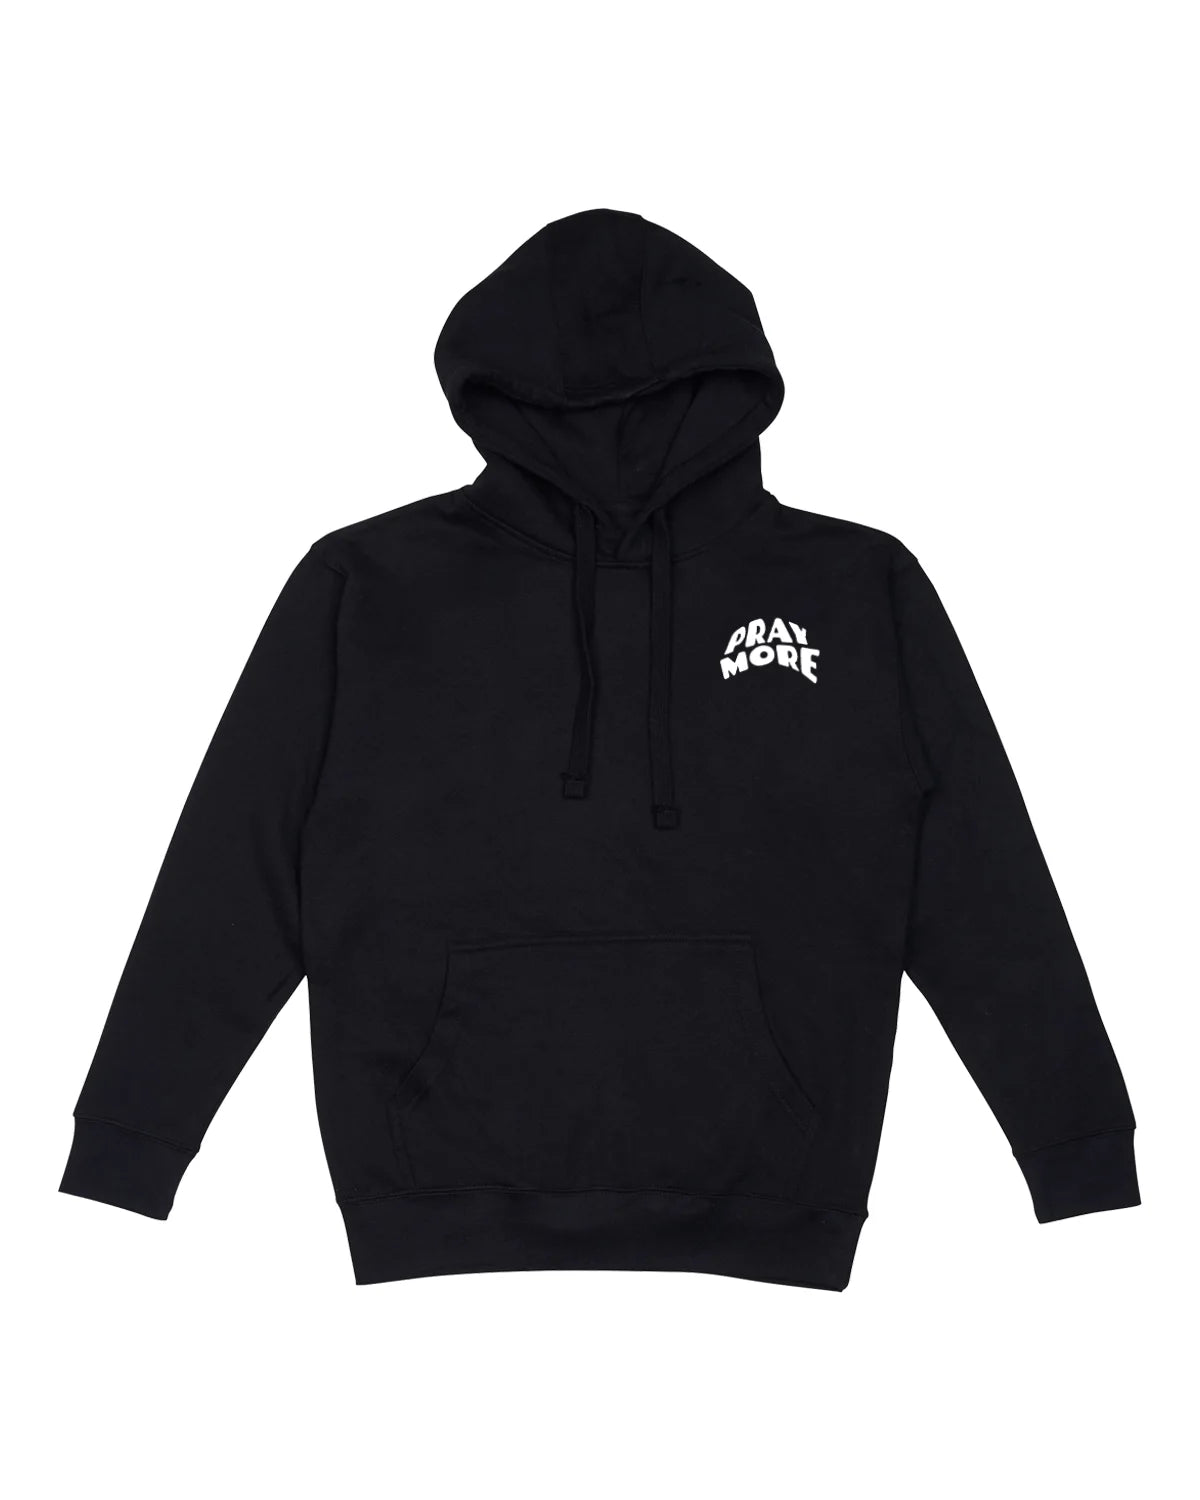 Black Pray More Worry Less Unisex Hoodie - Walk In Faith Clothing